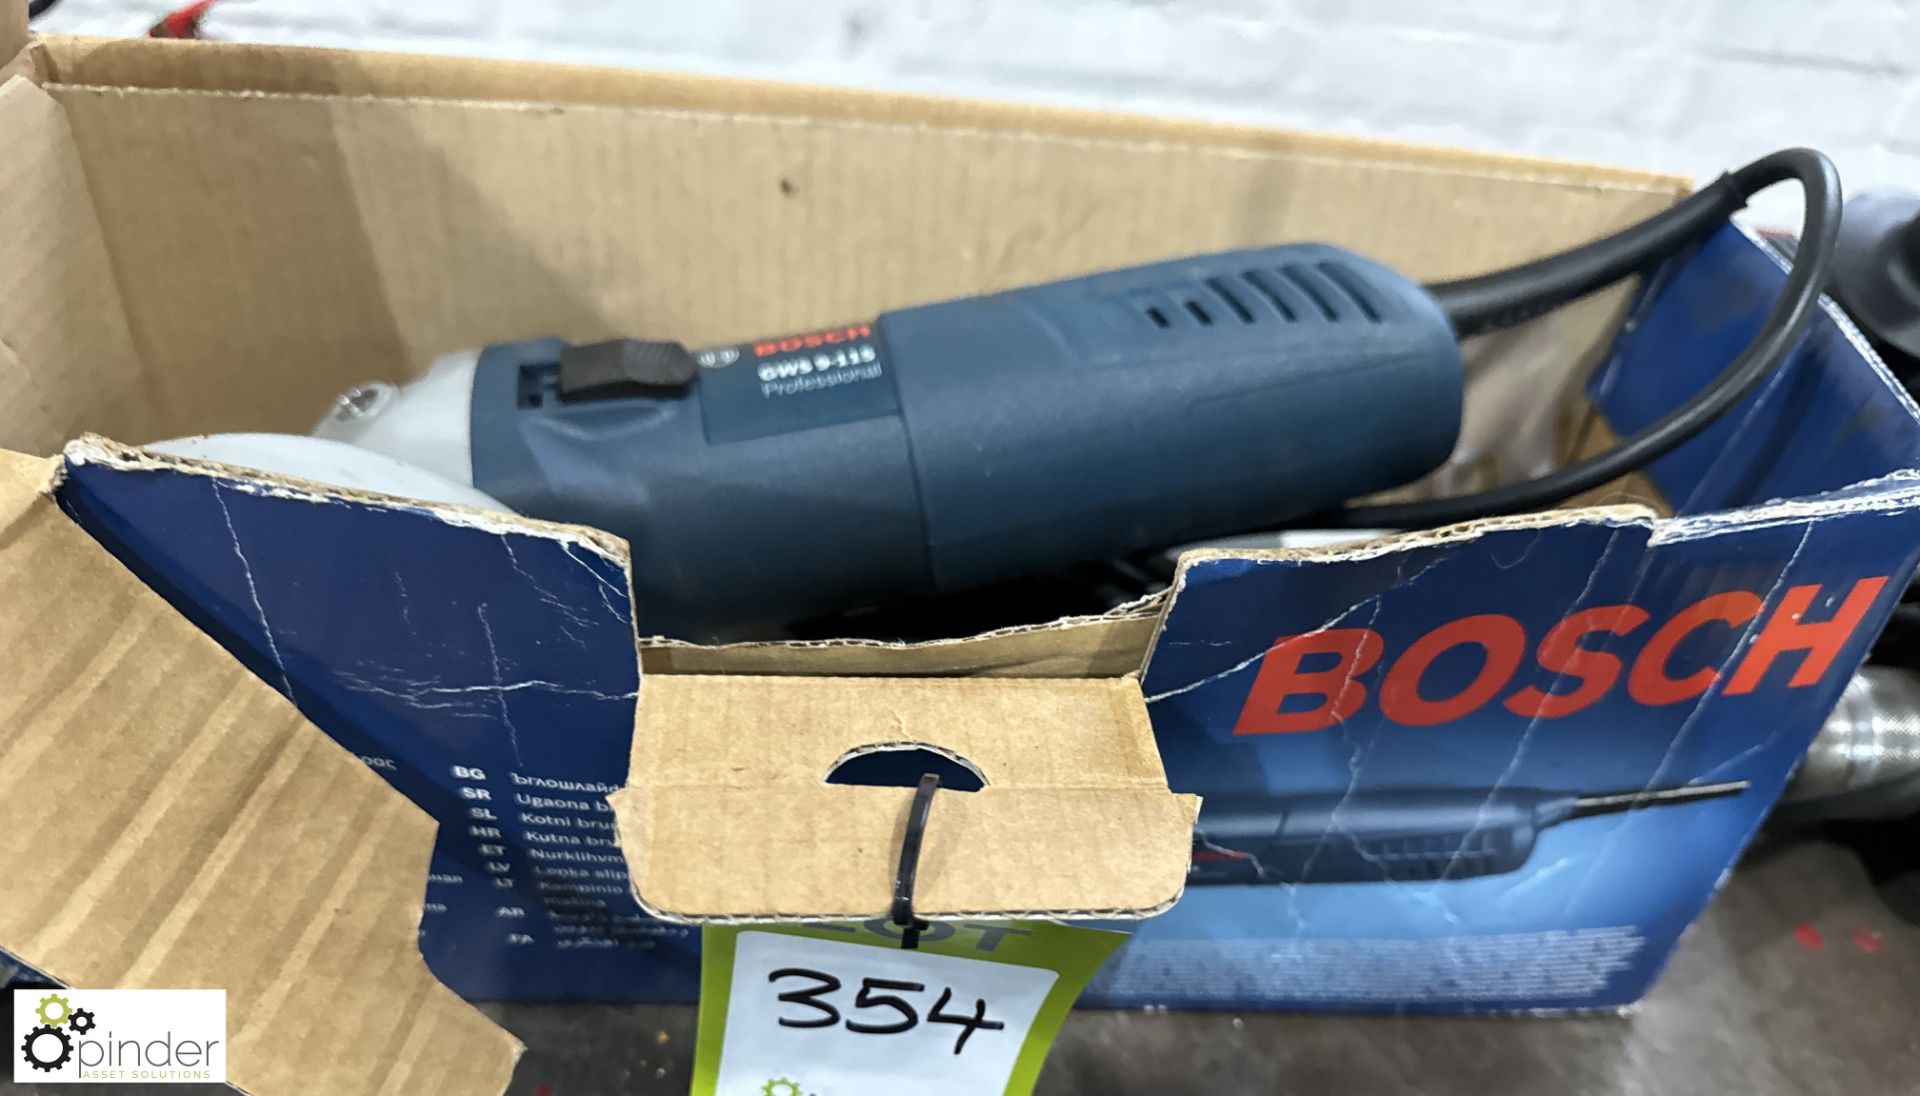 Bosch GWS9-115 Angle Grinder, 240volts, boxed - Image 3 of 4